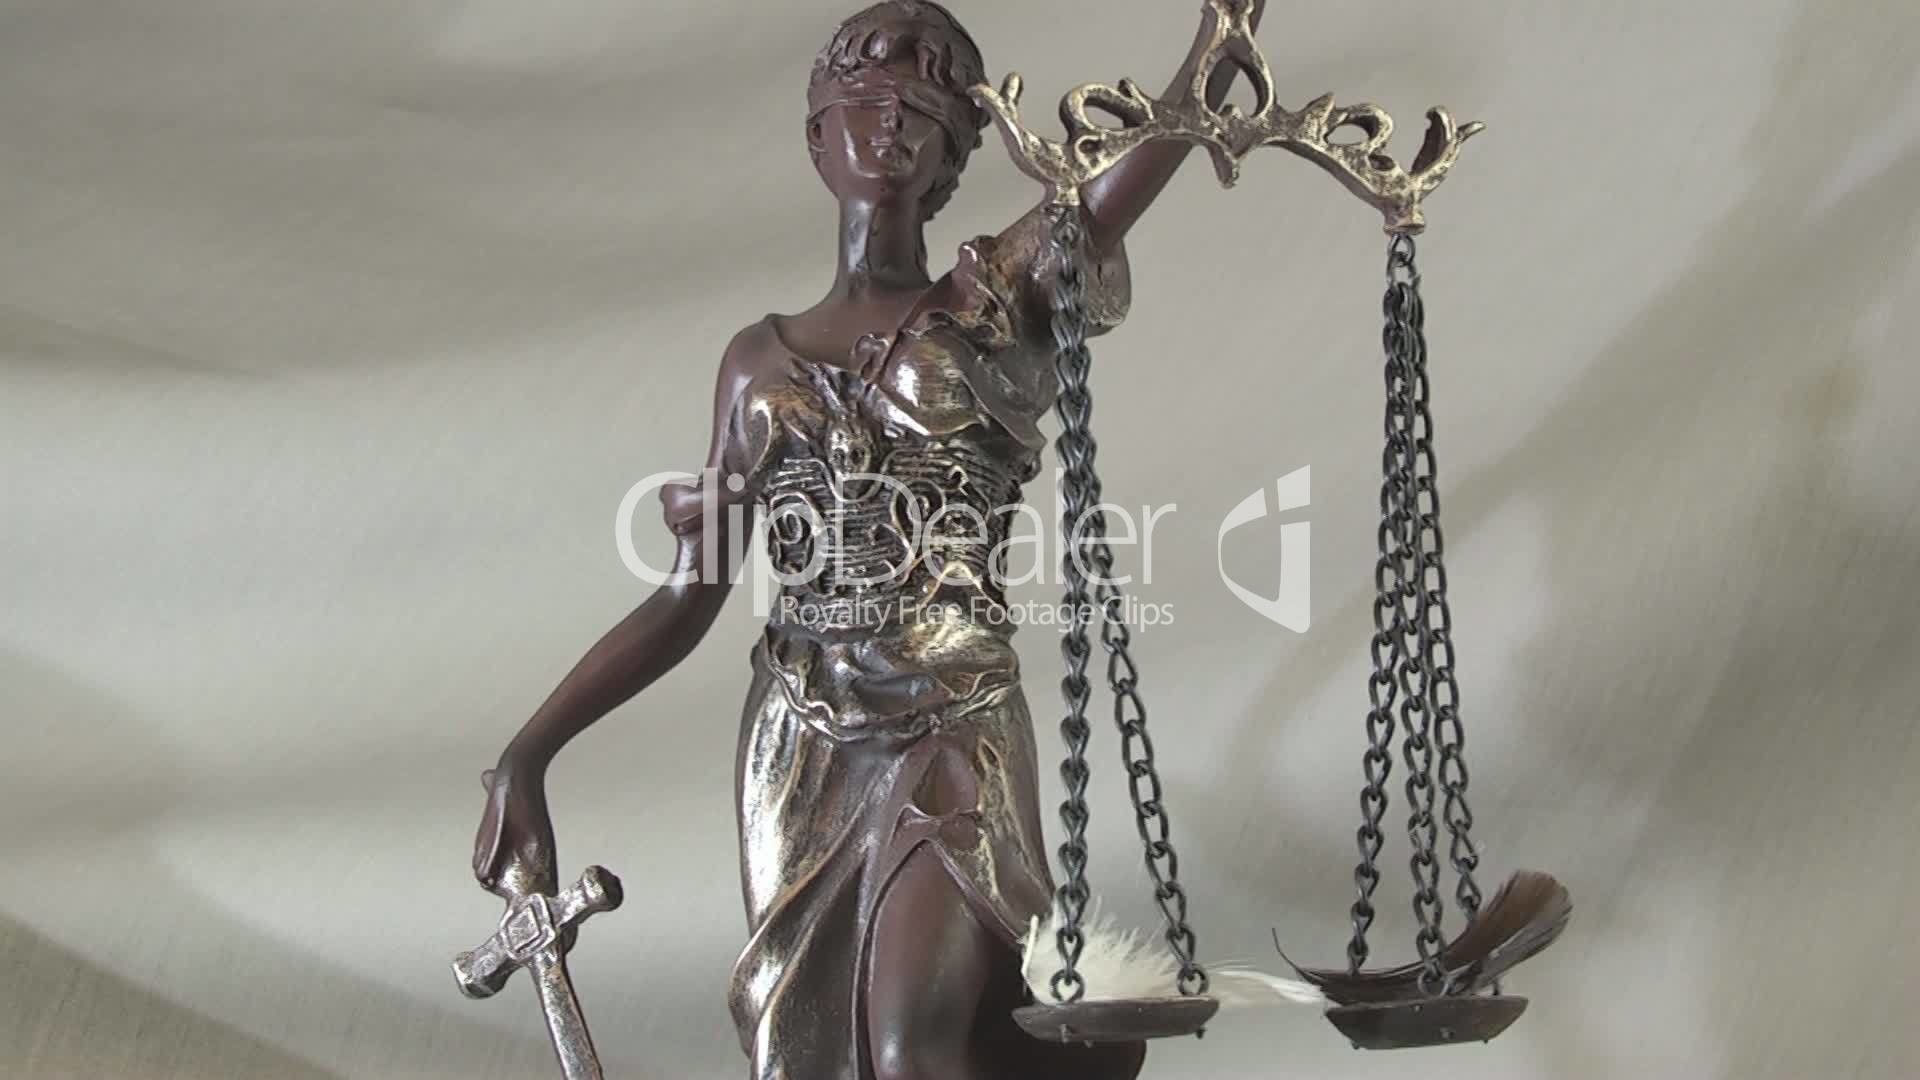 1920x1080 Legal blind justice themis statue with scales in chain royalty free jpg   Lady justice wallpaper